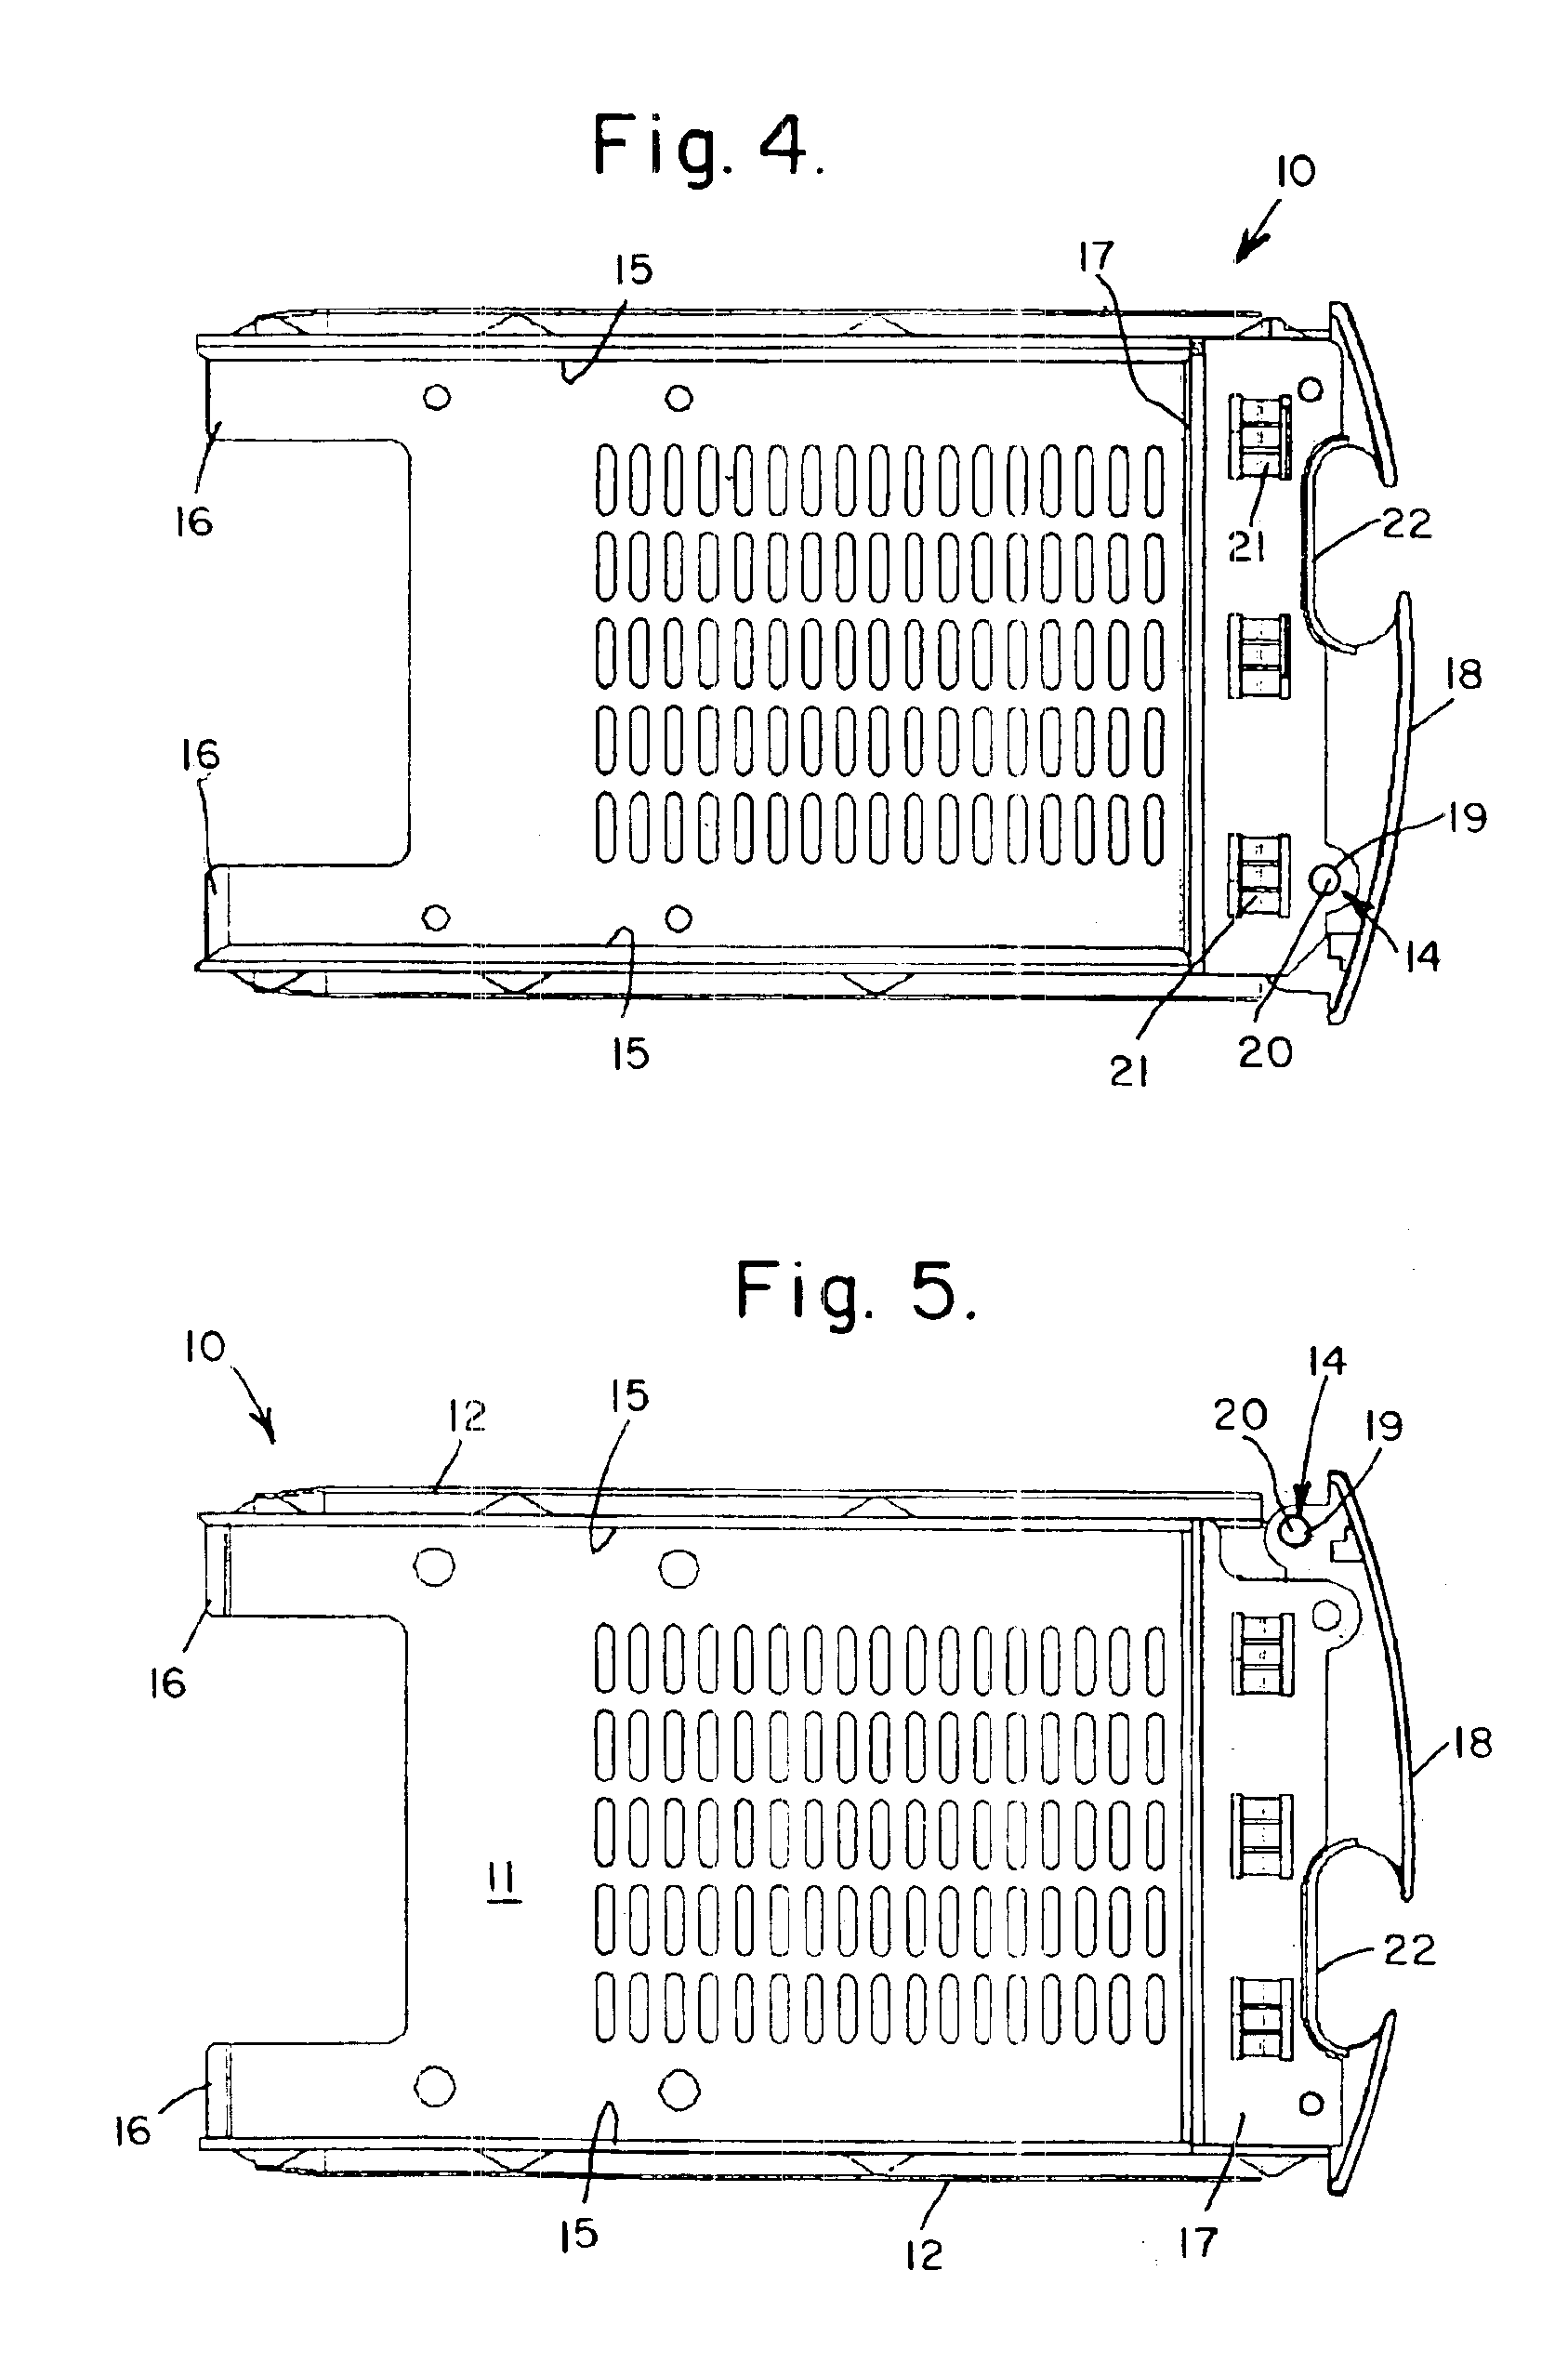 Enclosure for computer peripheral devices